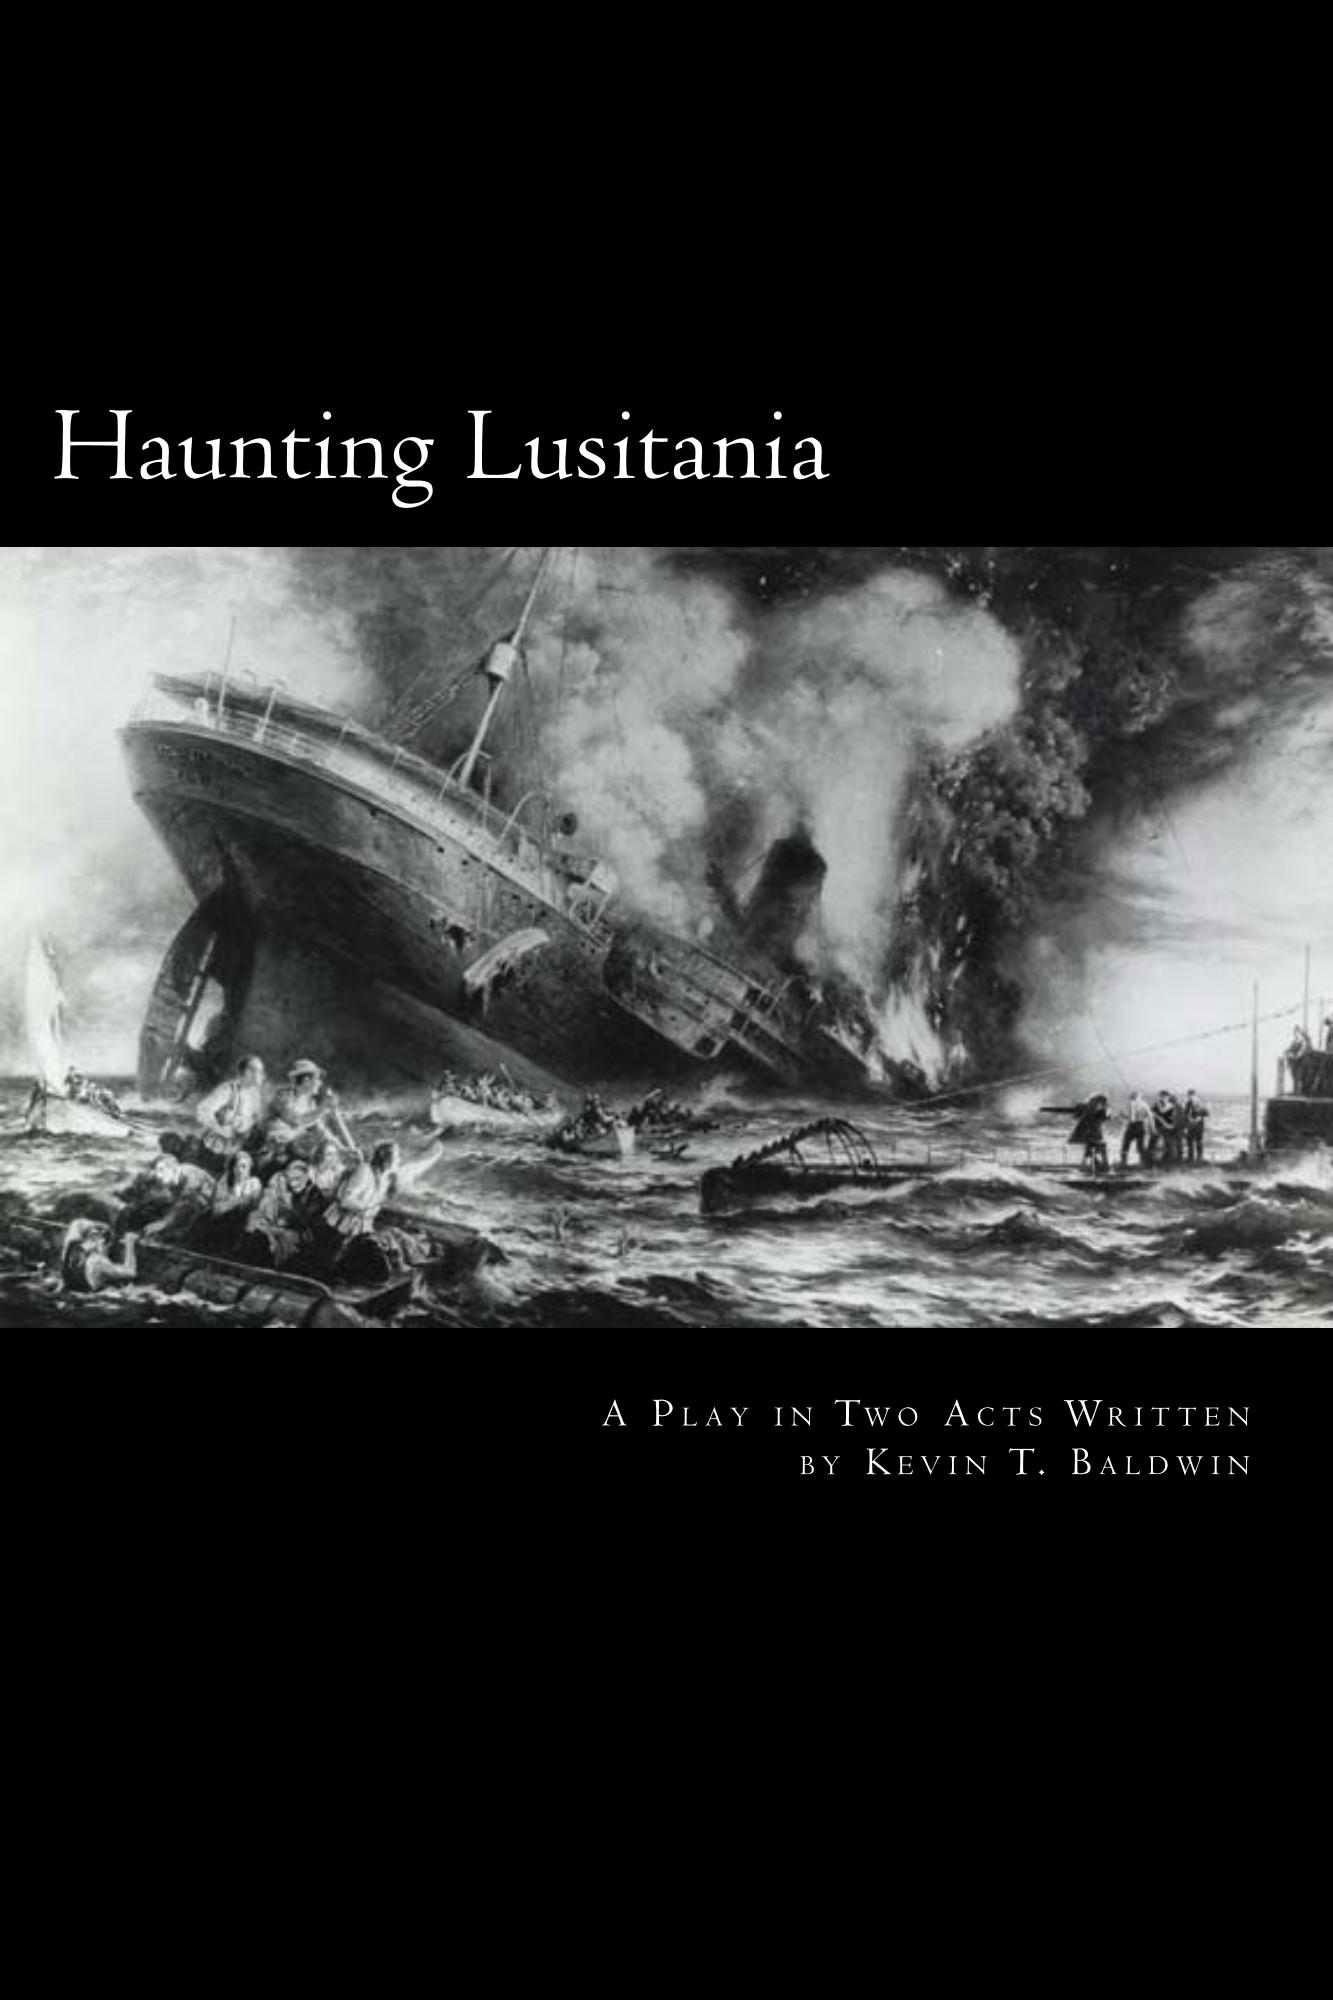 "Haunting Lusitania" - A Play in Two Acts